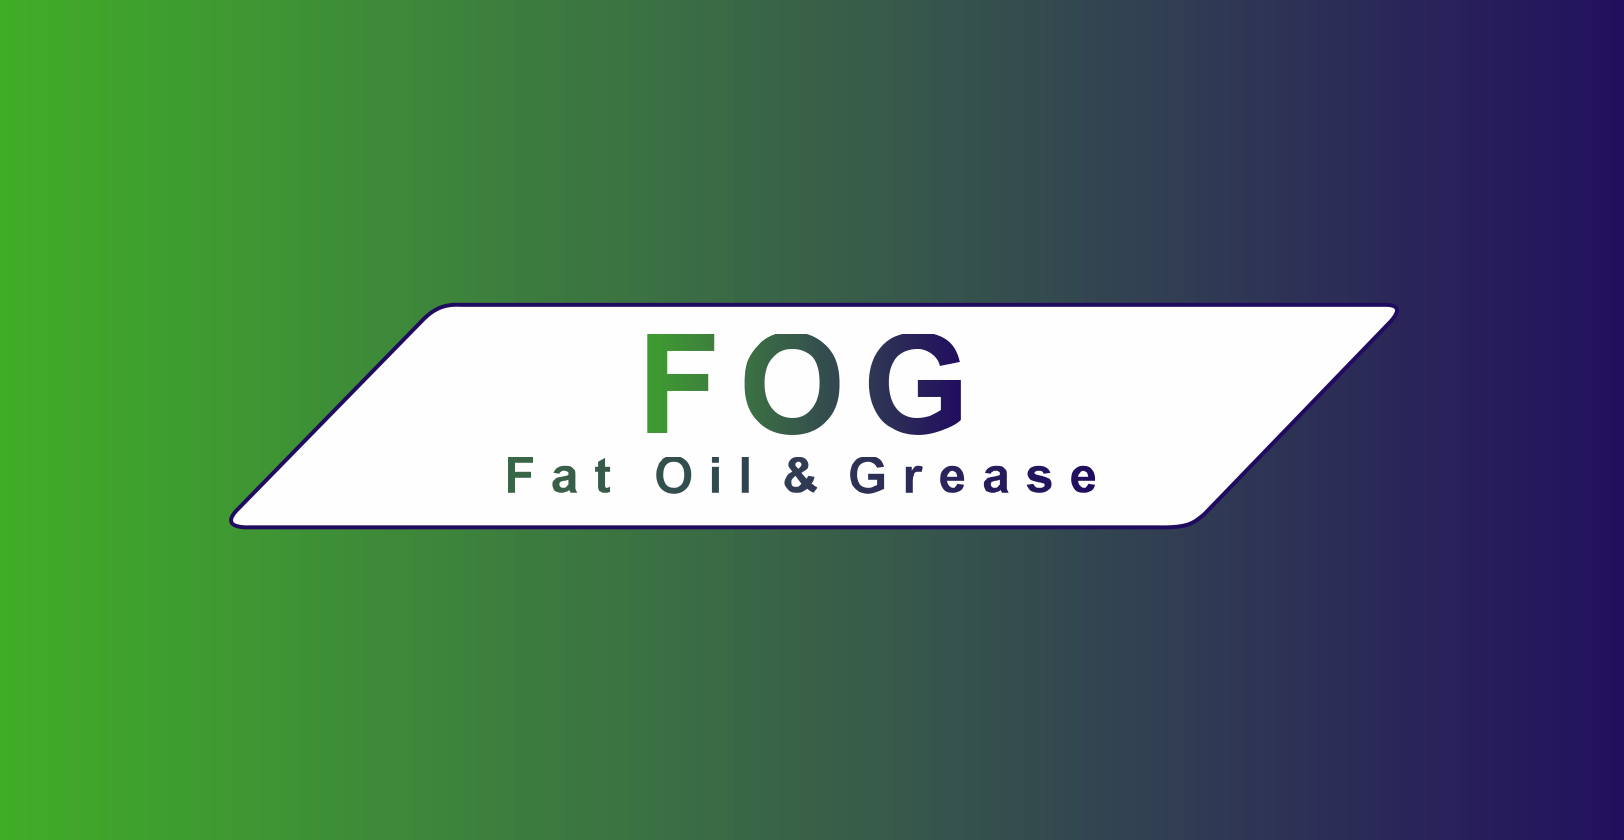 FAT, OIL AND GREASE (FOG)